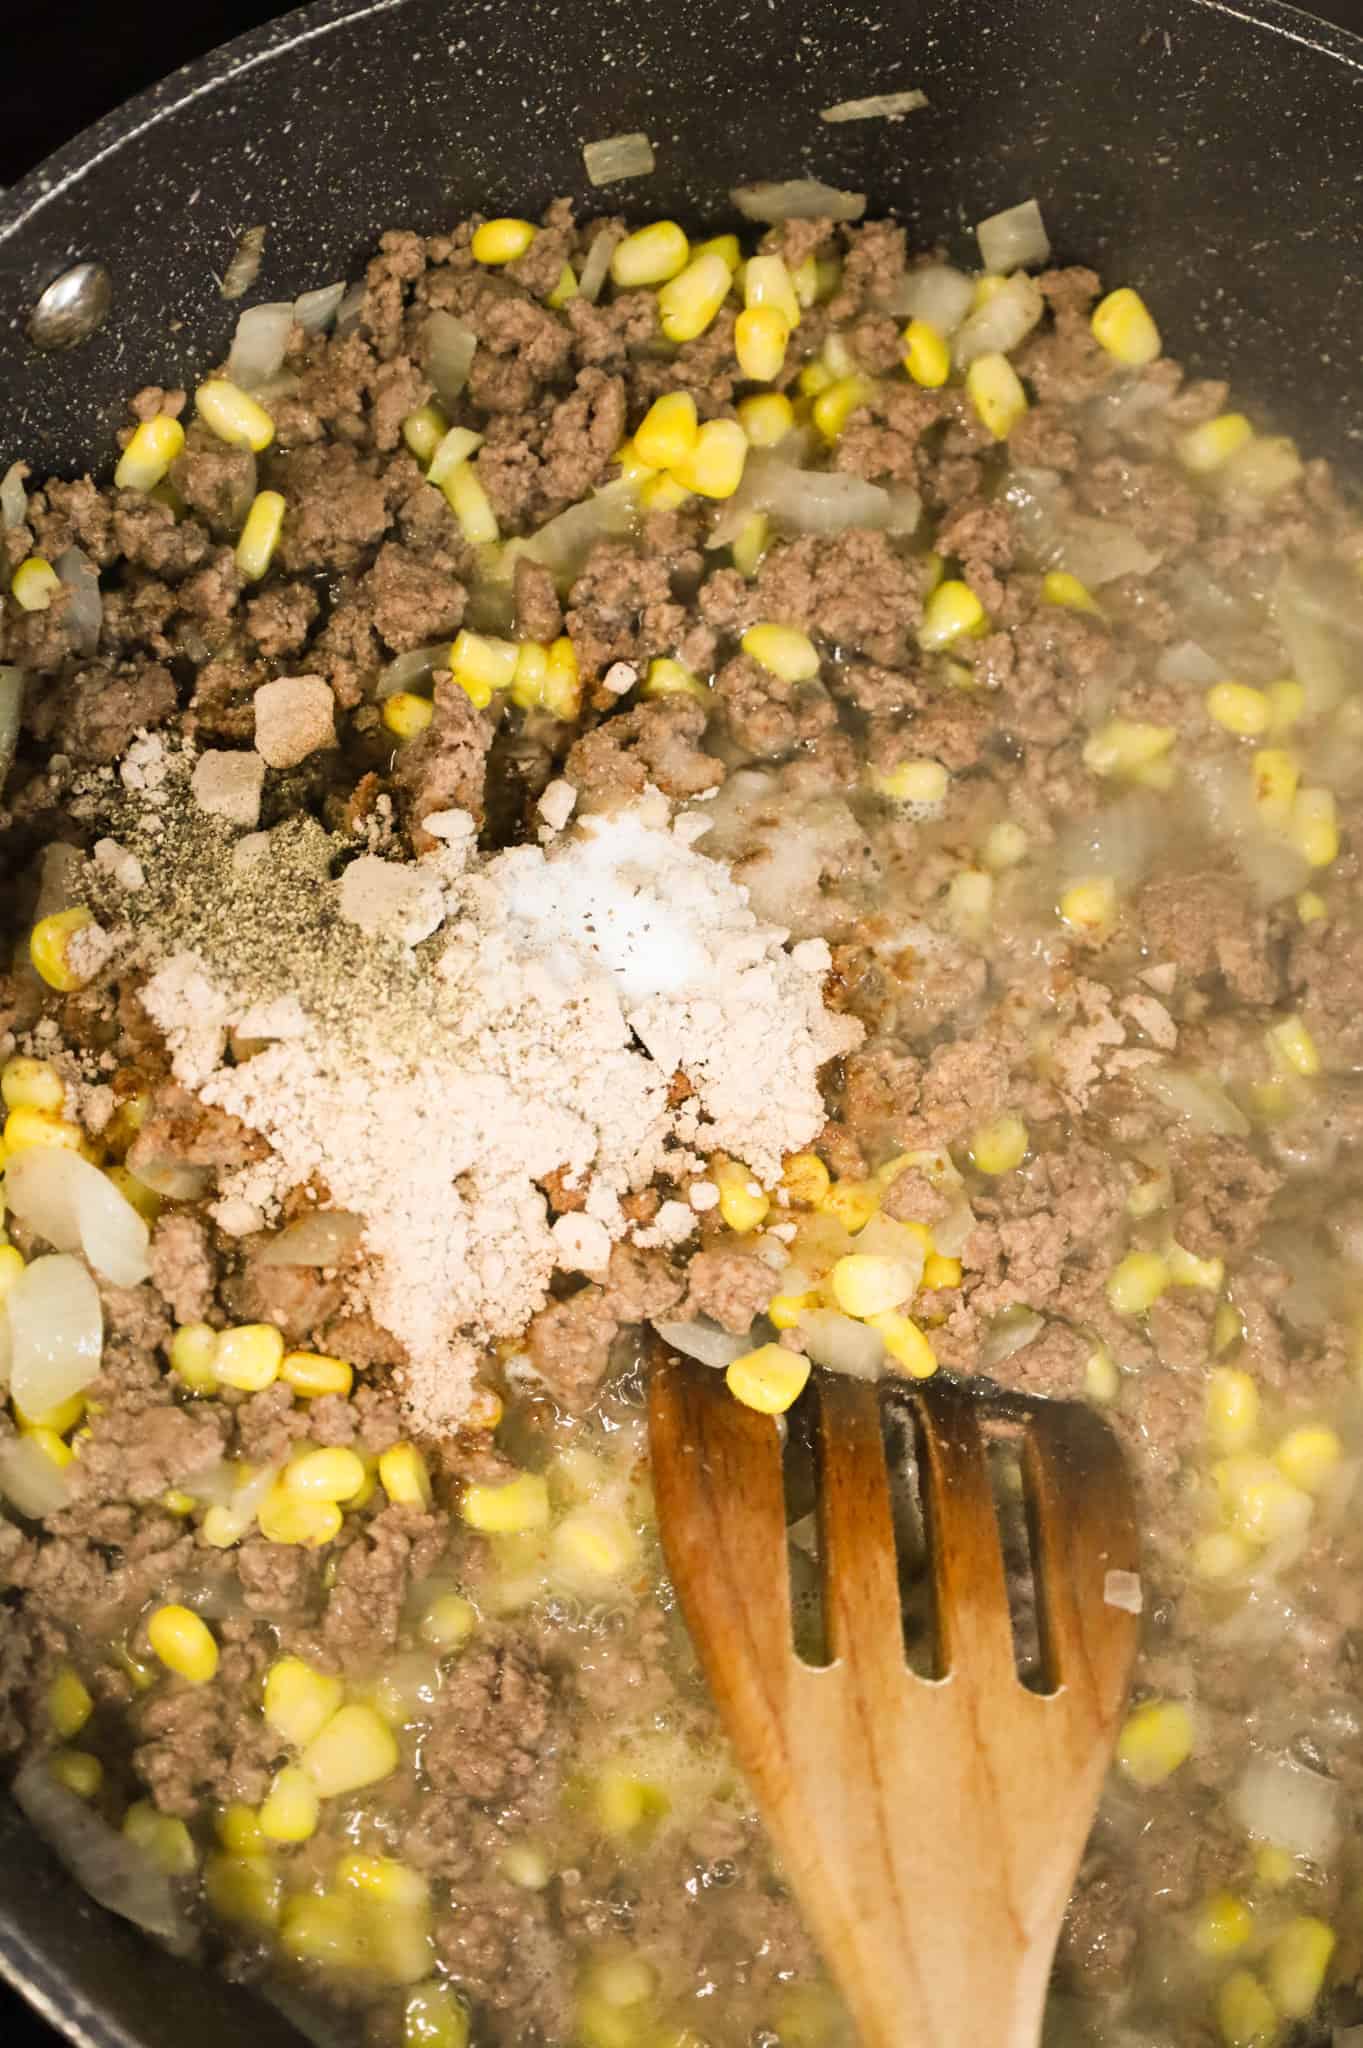 salt, pepper brown gravy mix and water added to skillet with ground beef mixture